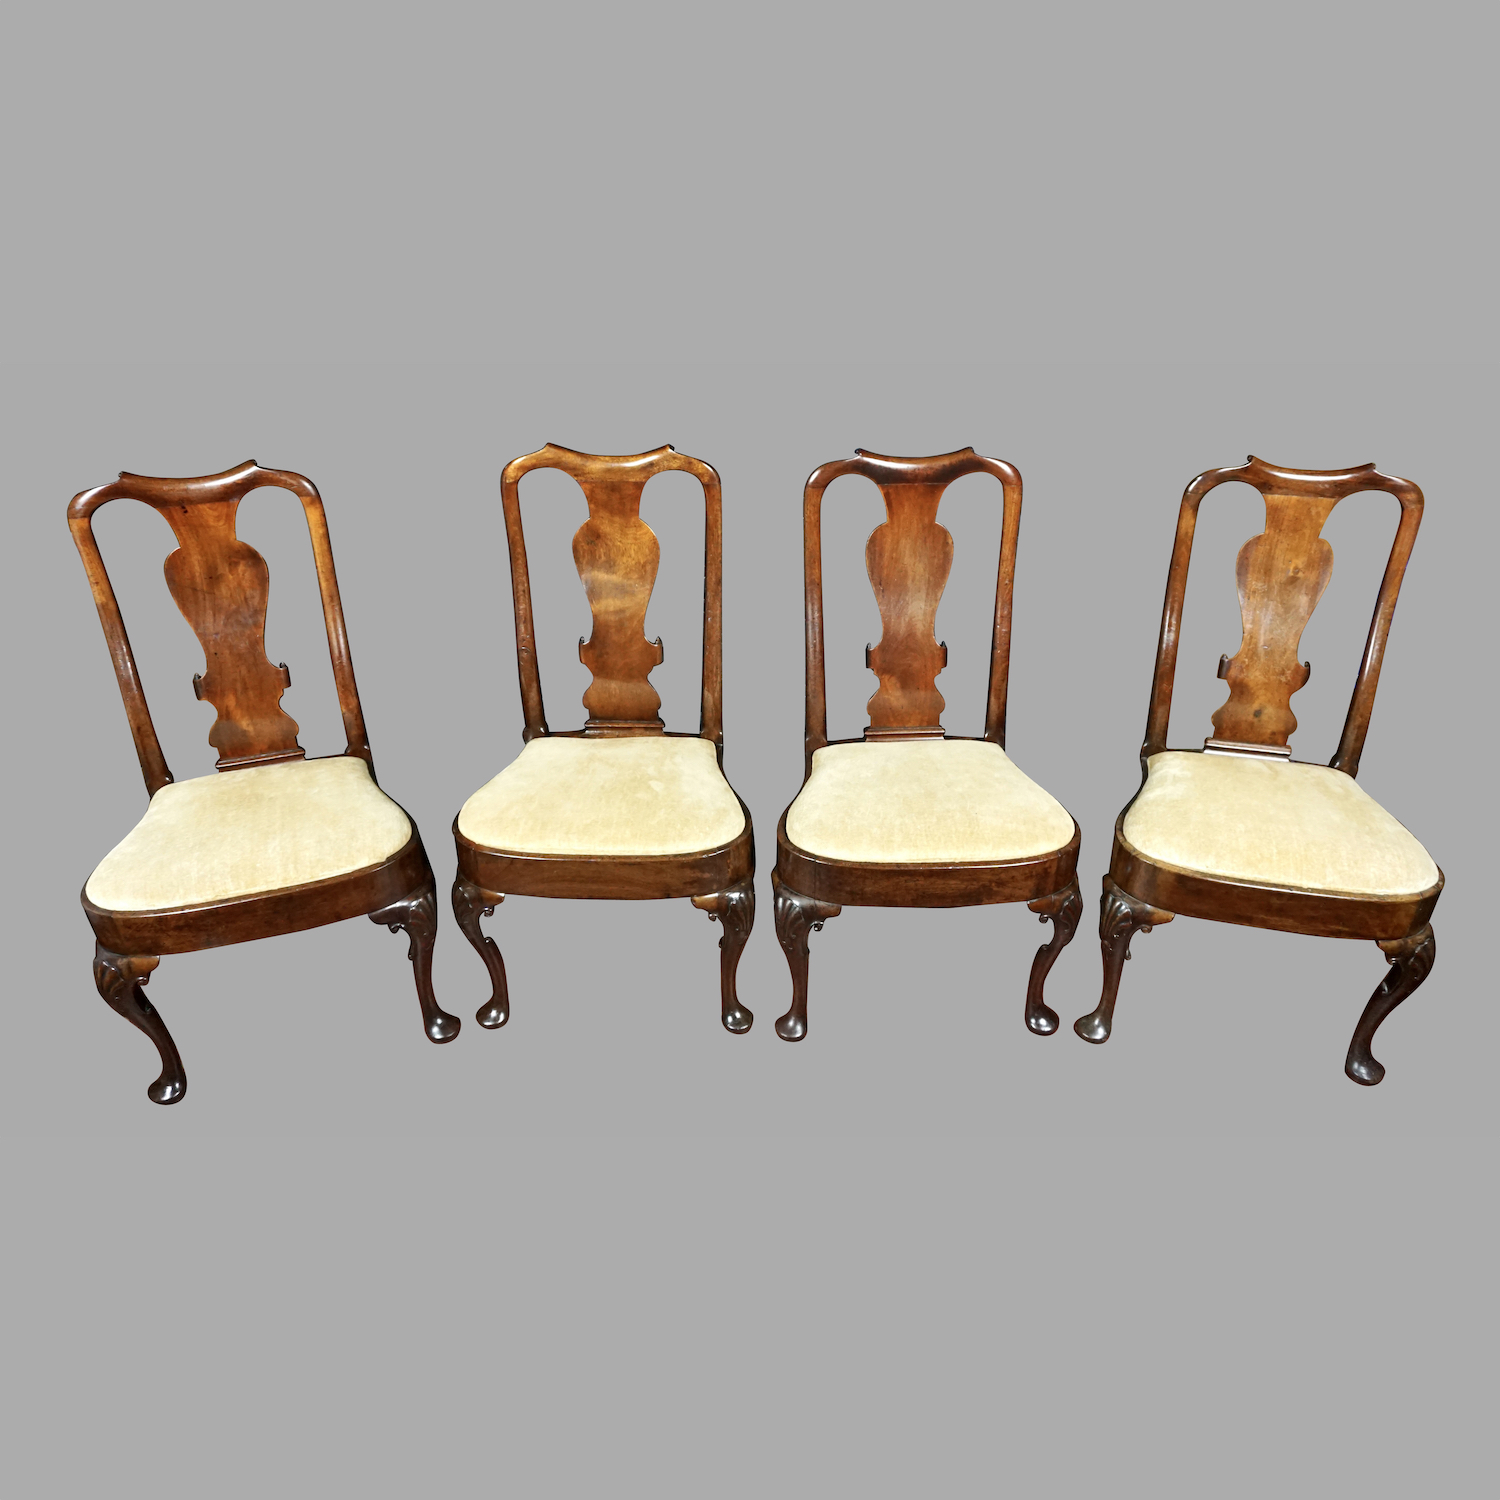 set-four-english-george-ii-period-walnut-side-chairs-with-shelled-carved-legs-tr1222-7